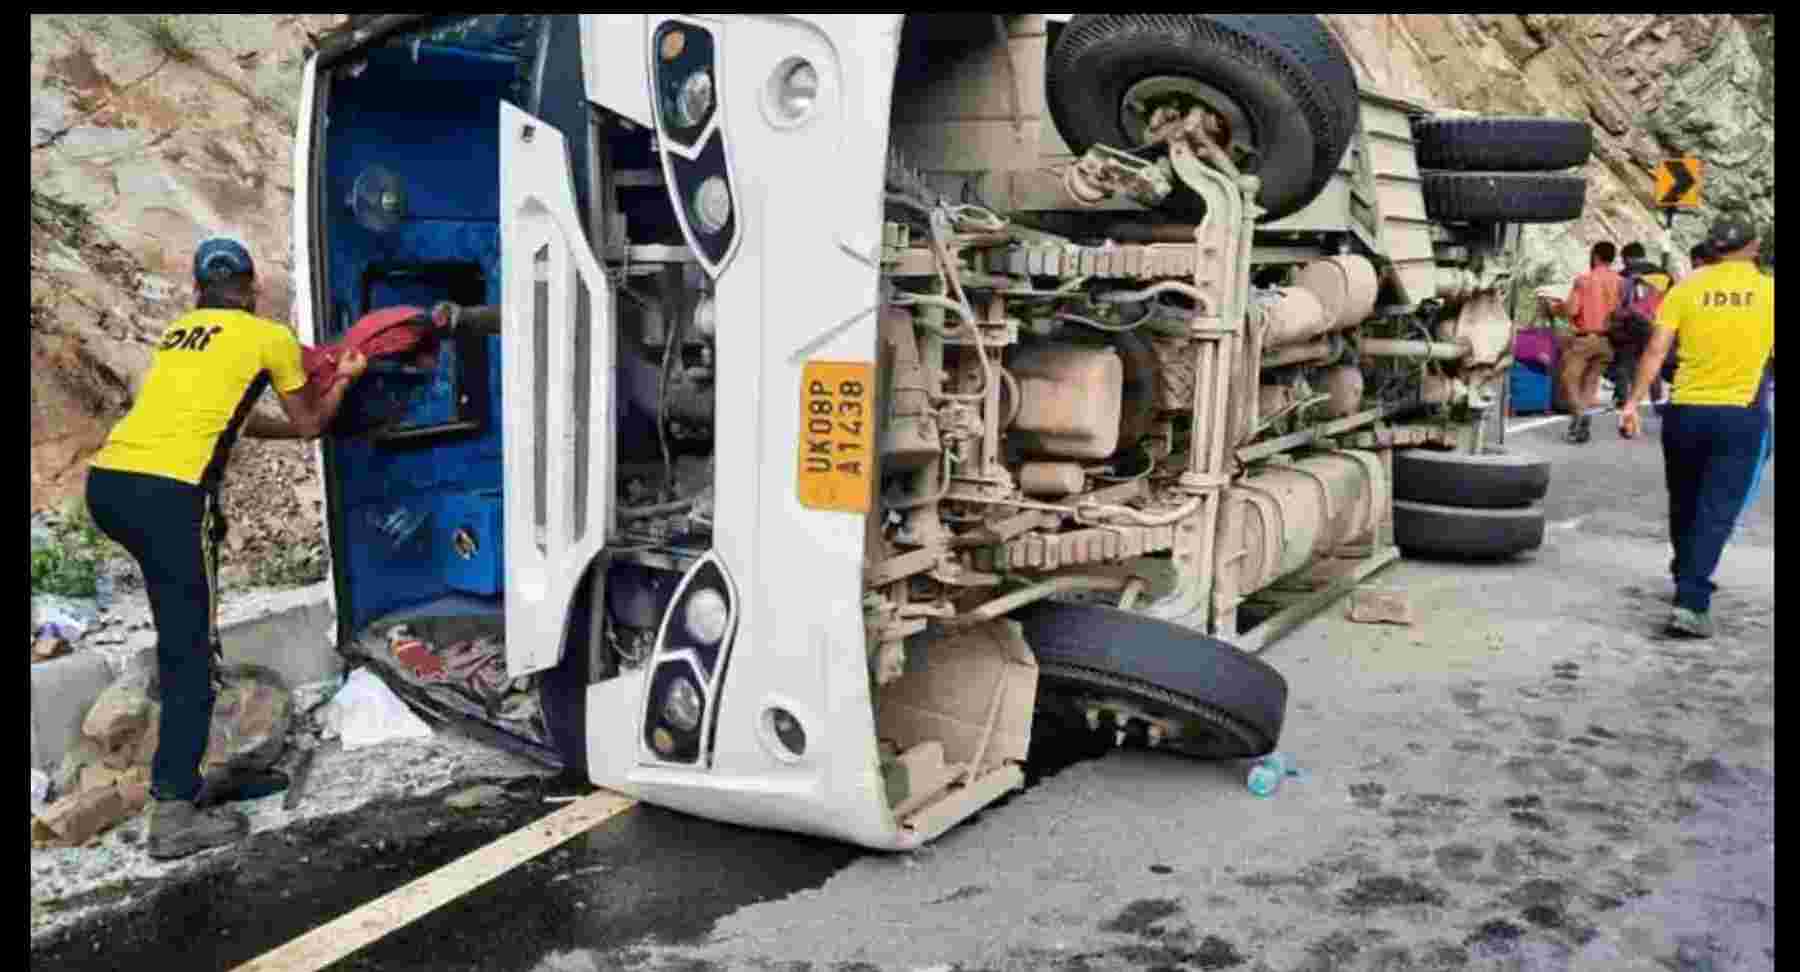 Uttarakhand: The driver was drunk in the middle of the road, in tehri bus accident